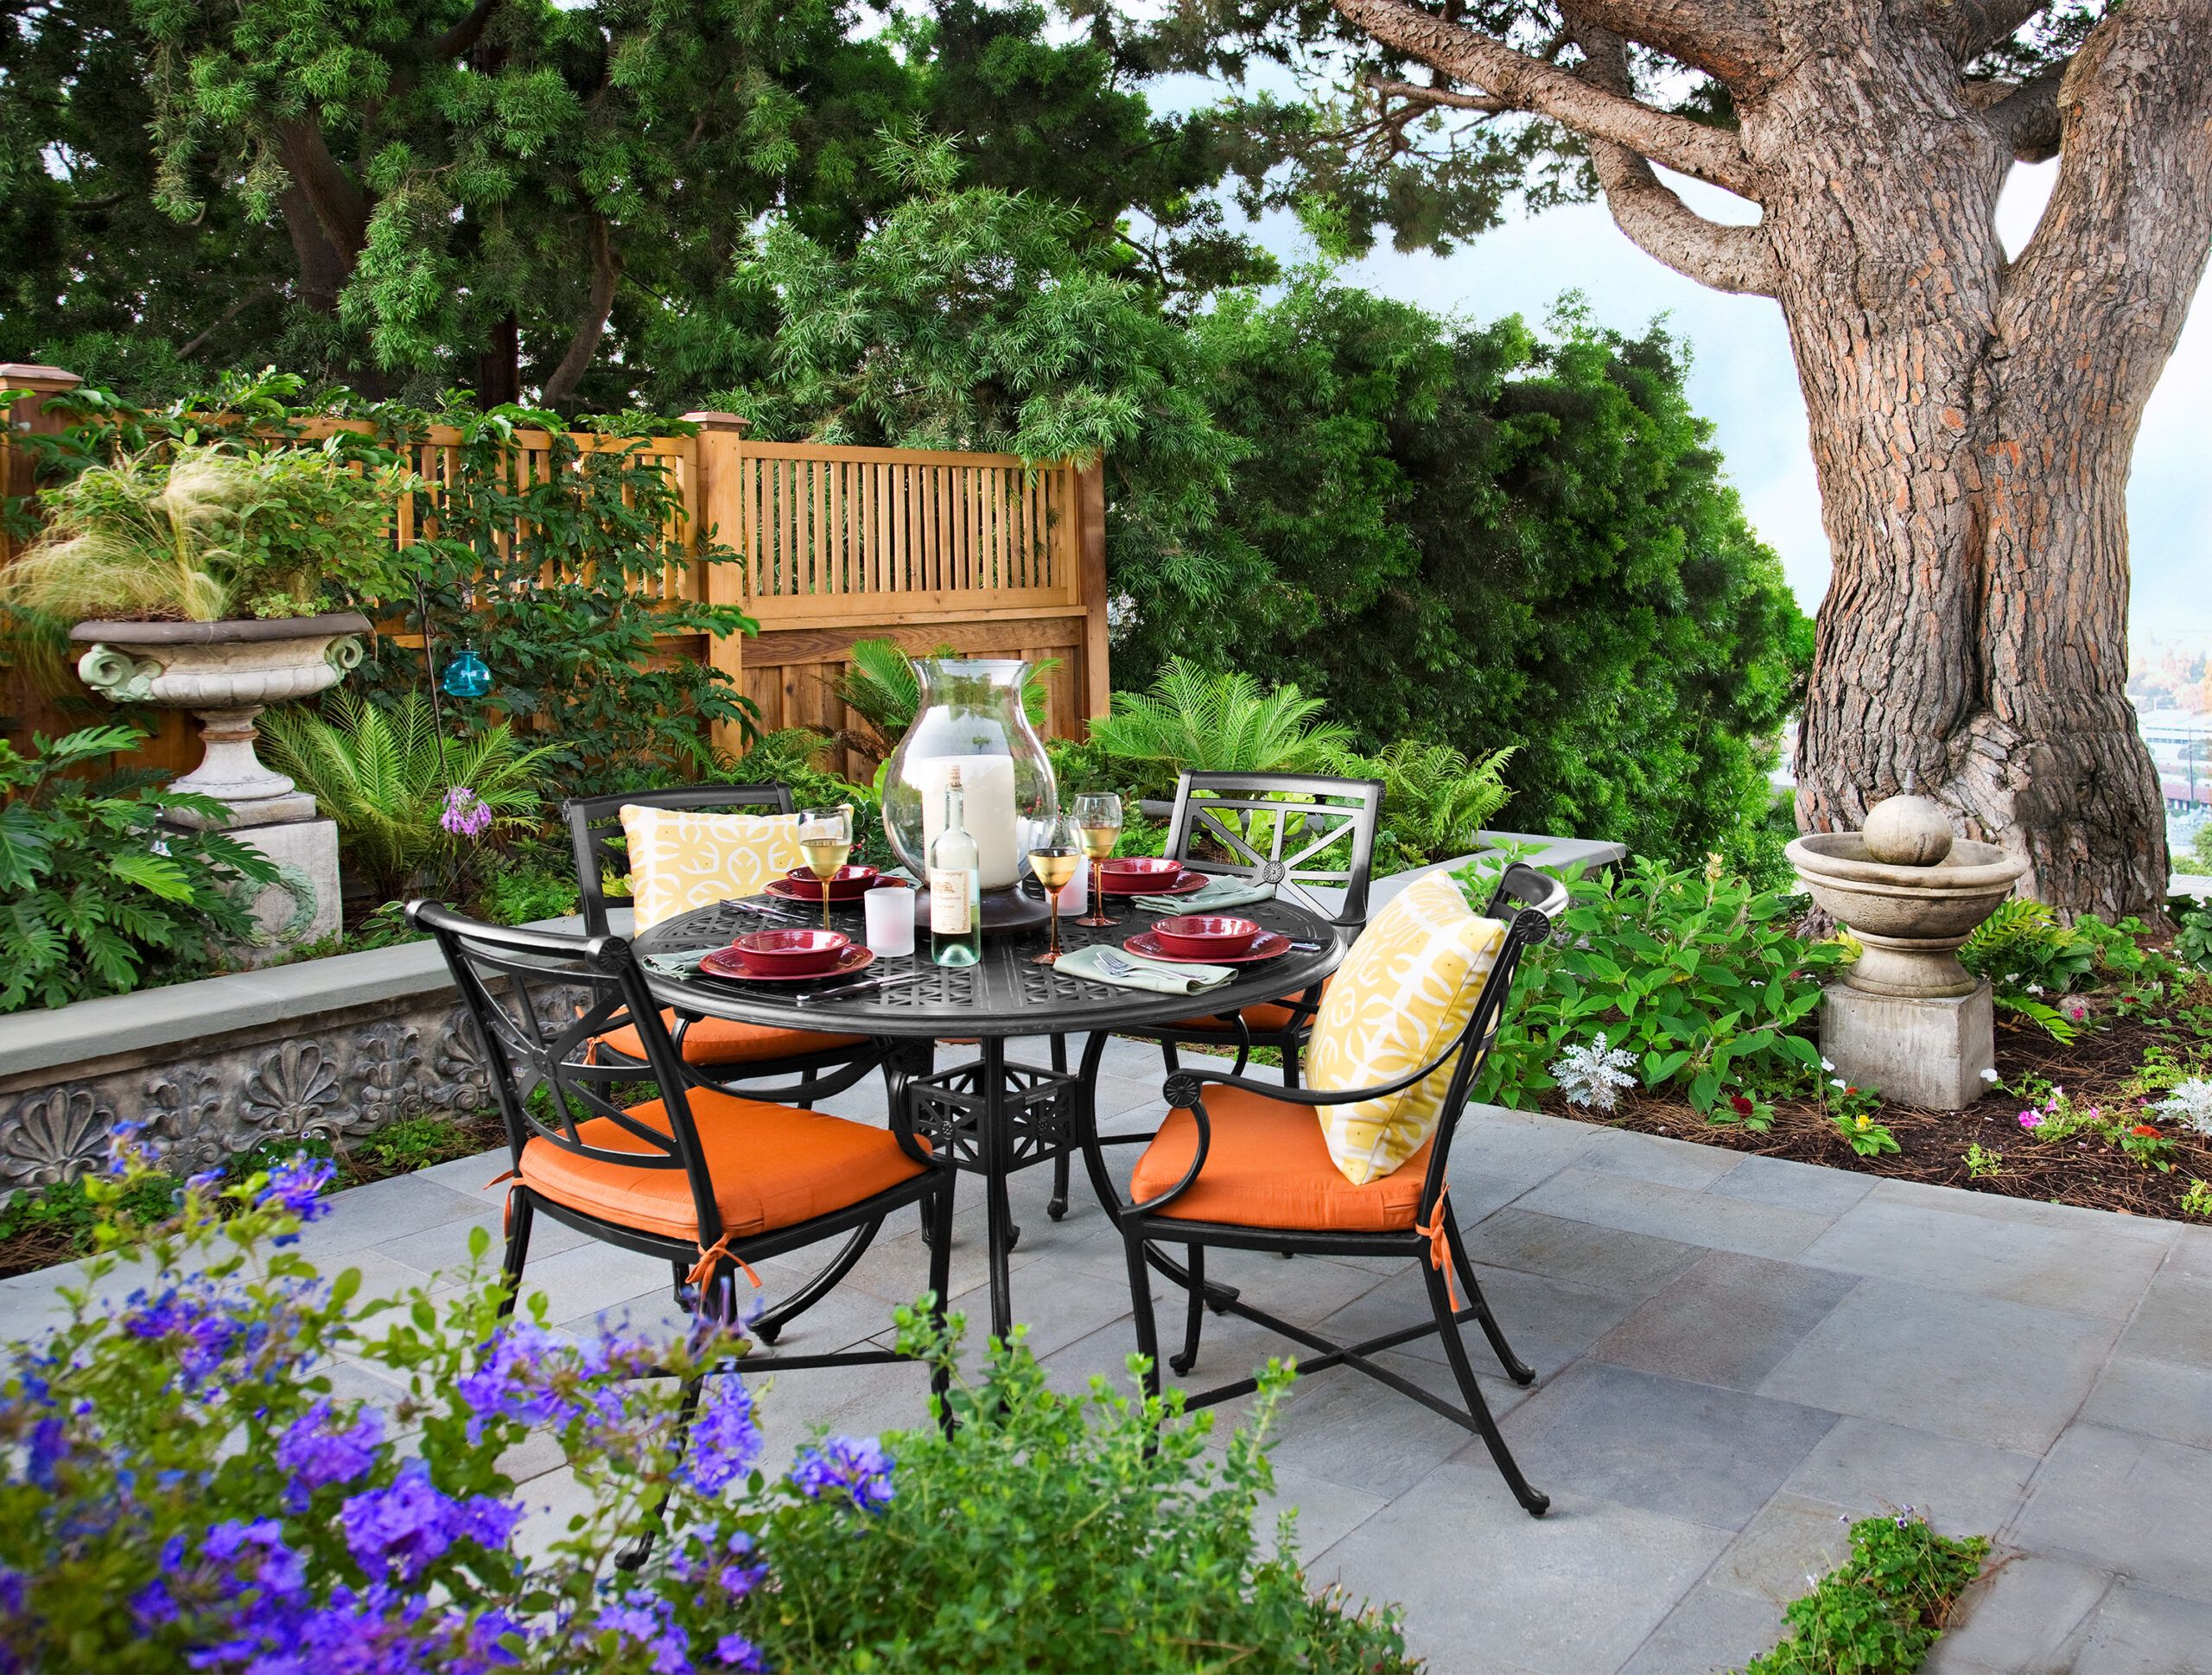 42 Ideas For The Perfect Outdoor Space - This Old House